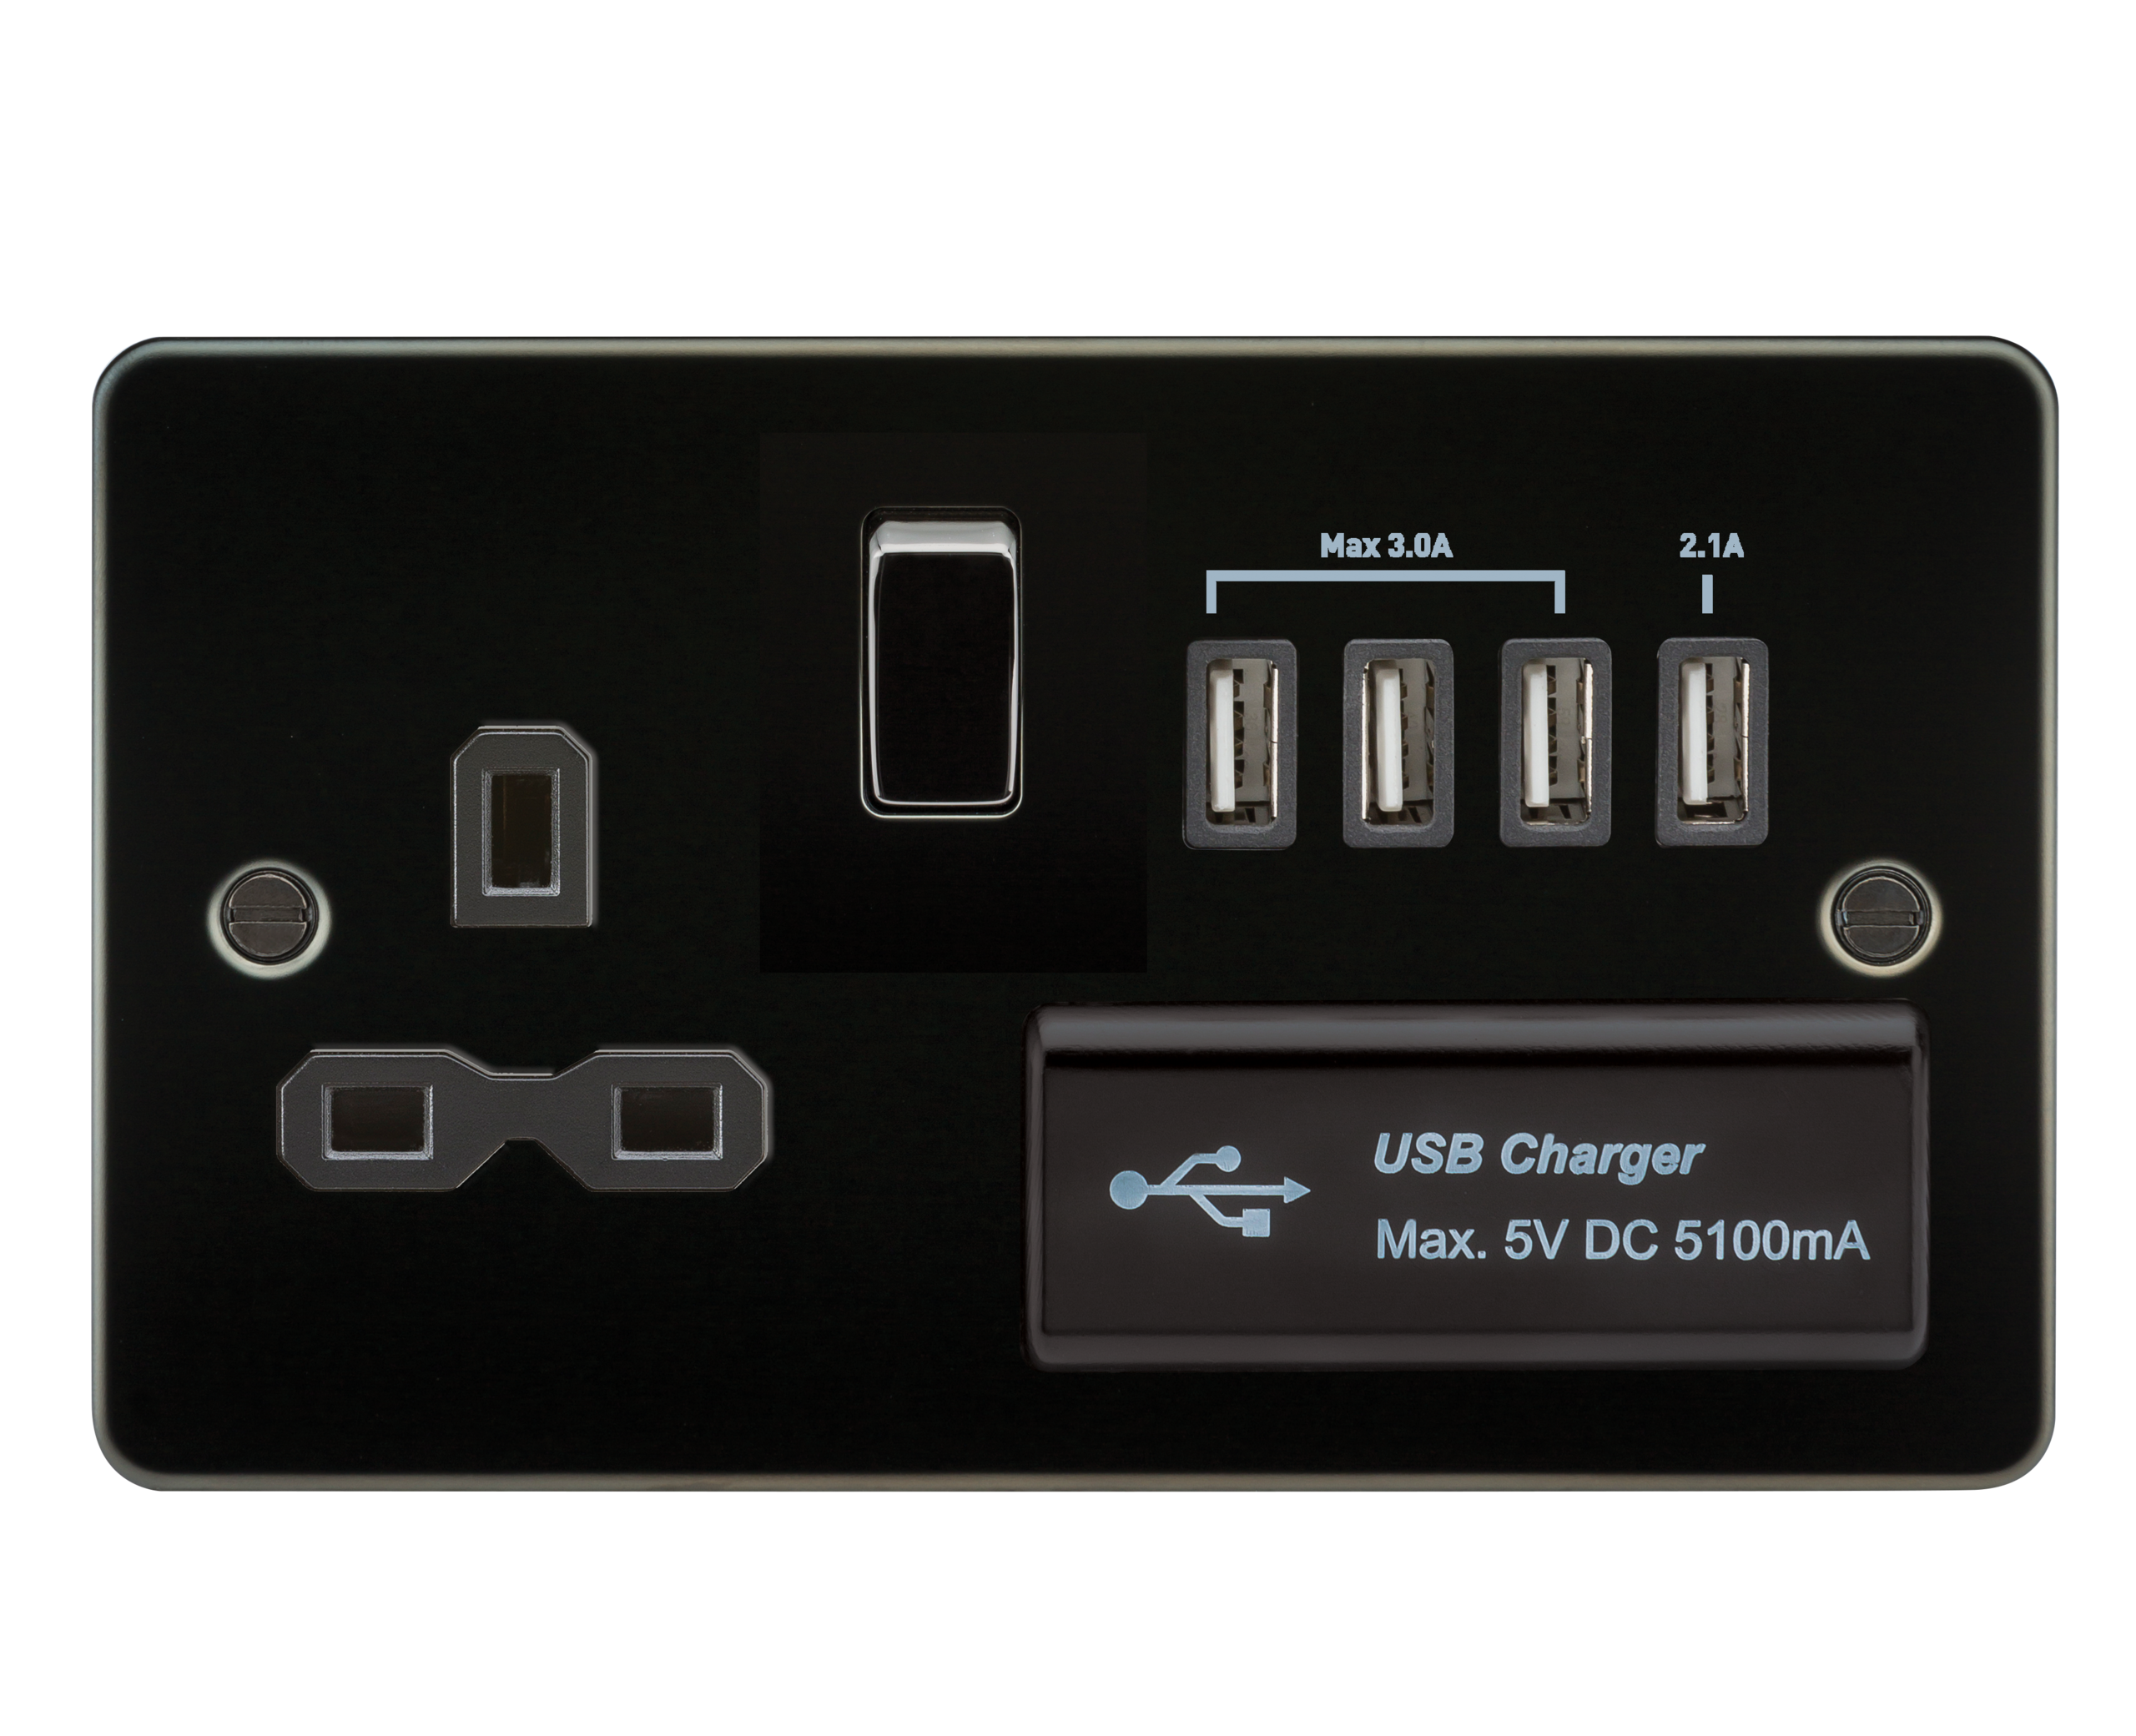 Flat Plate 13A Switched Socket With Quad USB Charger - Gunmetal With Black Insert - FPR7USB4GM 